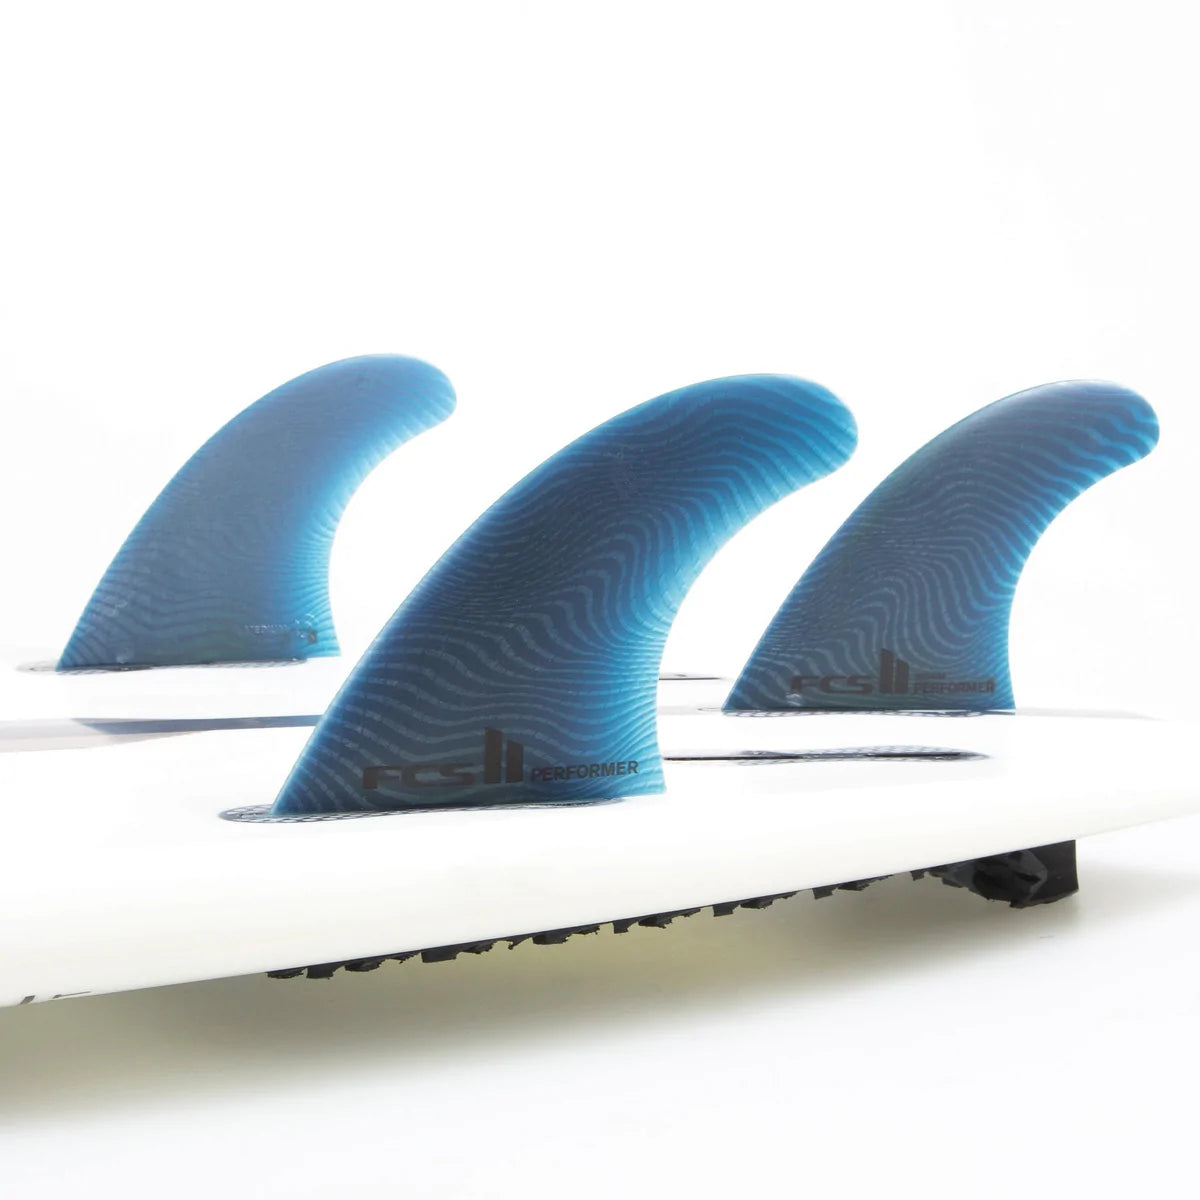 FCS II Performer Neo Glass Eco - Tri Fins Sizes Vary